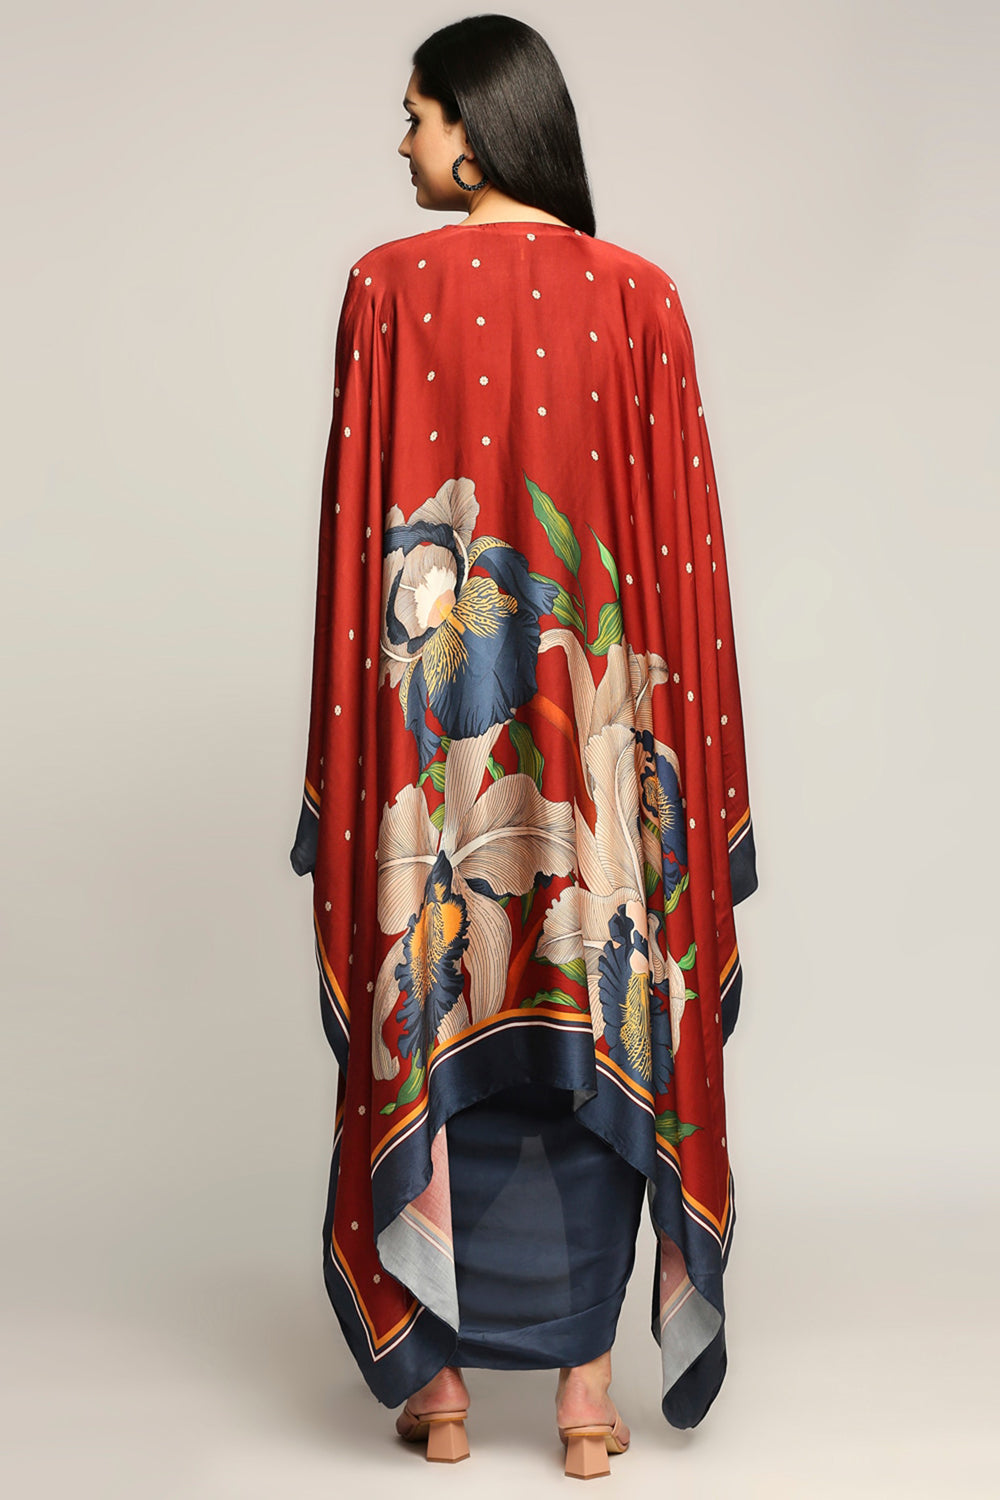 Orchid Bloom Printed Drape Dress With Cape